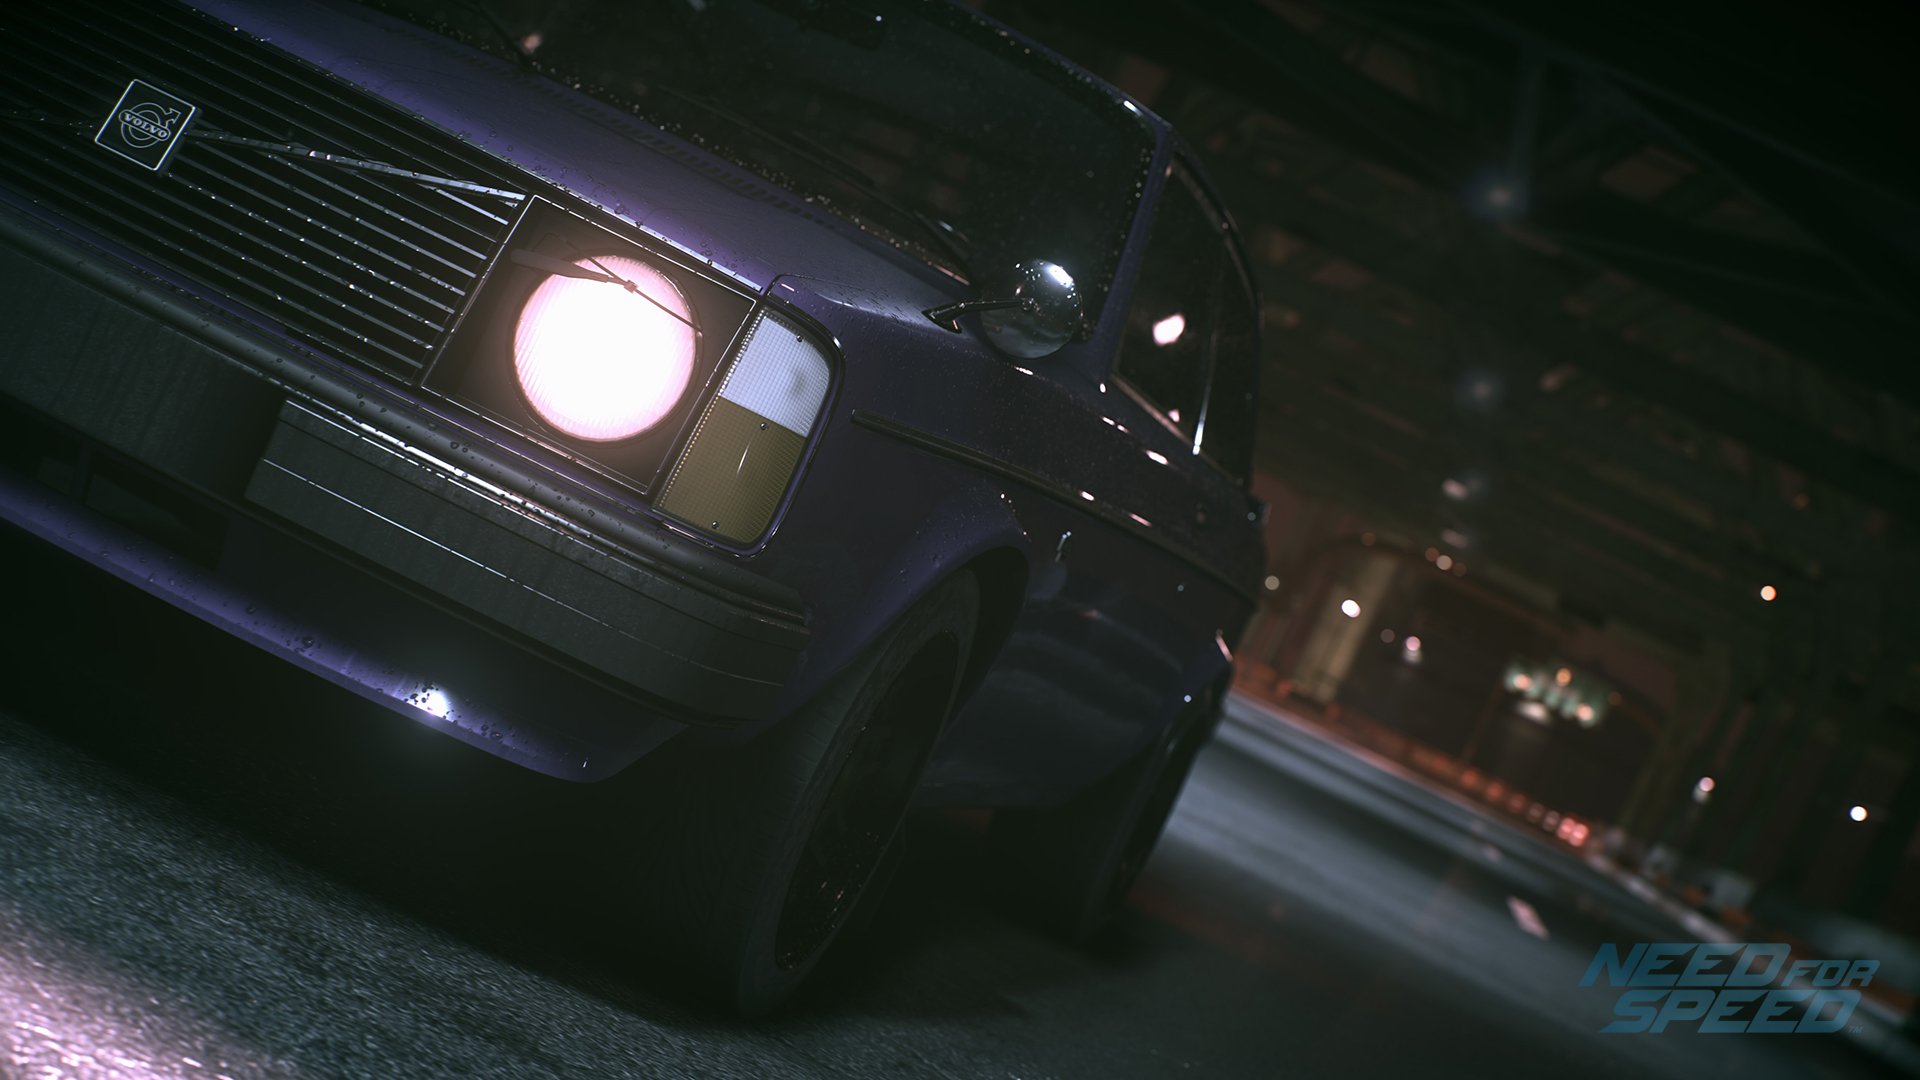 The Volvo 242 Dl De Luxe Hd Wallpaper Background Image 1920x1080